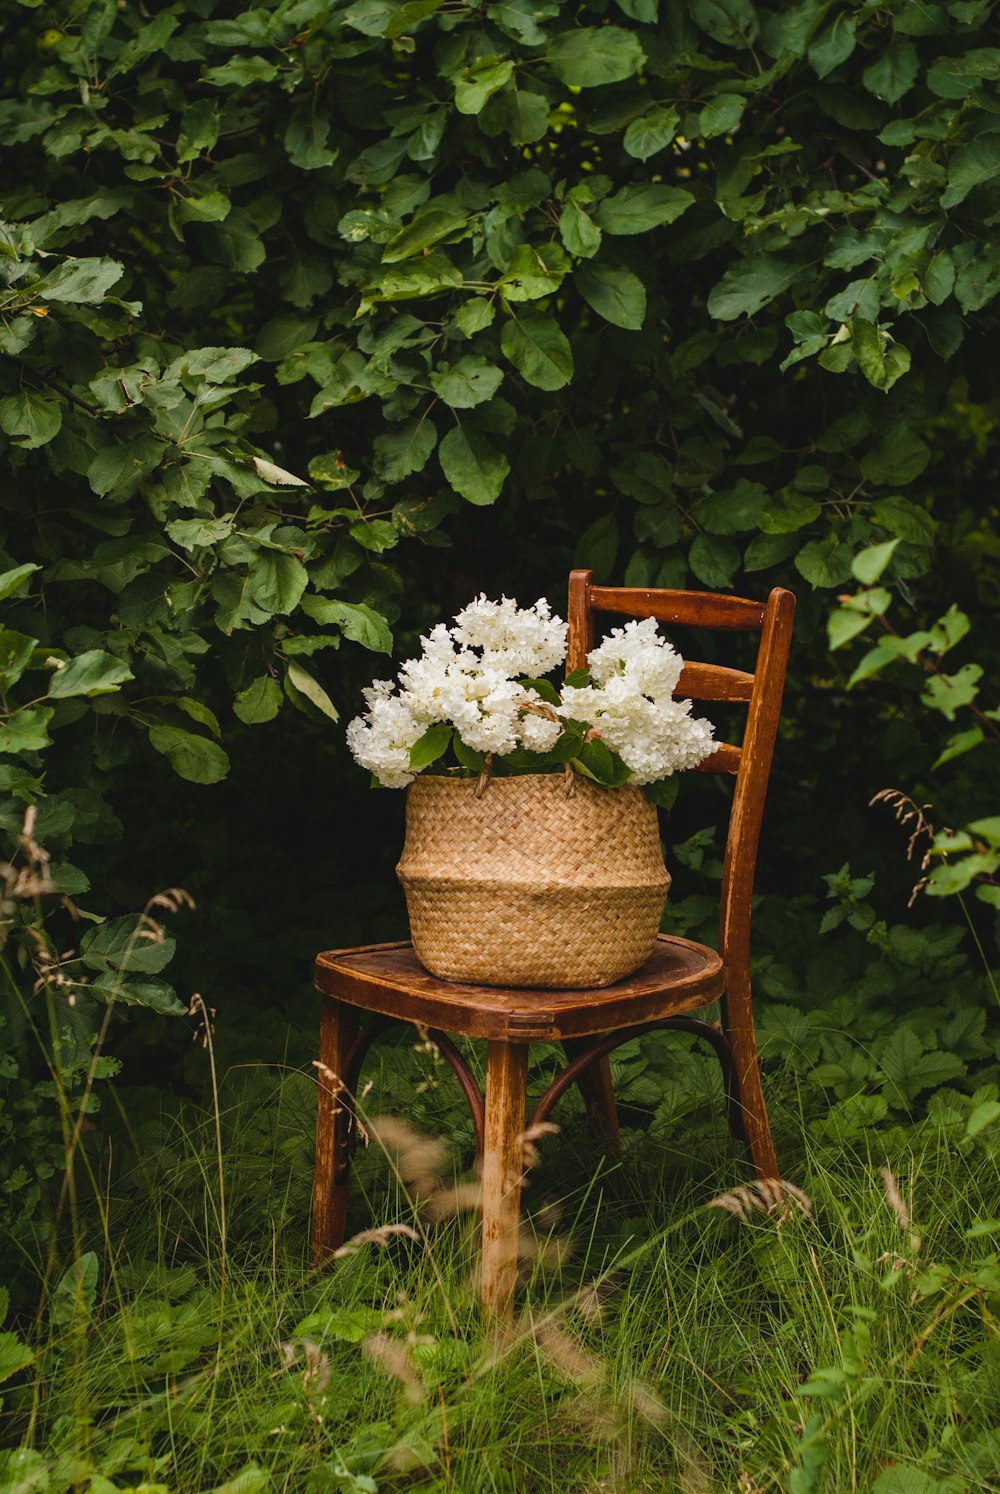 white flowers in brown woven basket on brown wooden chair